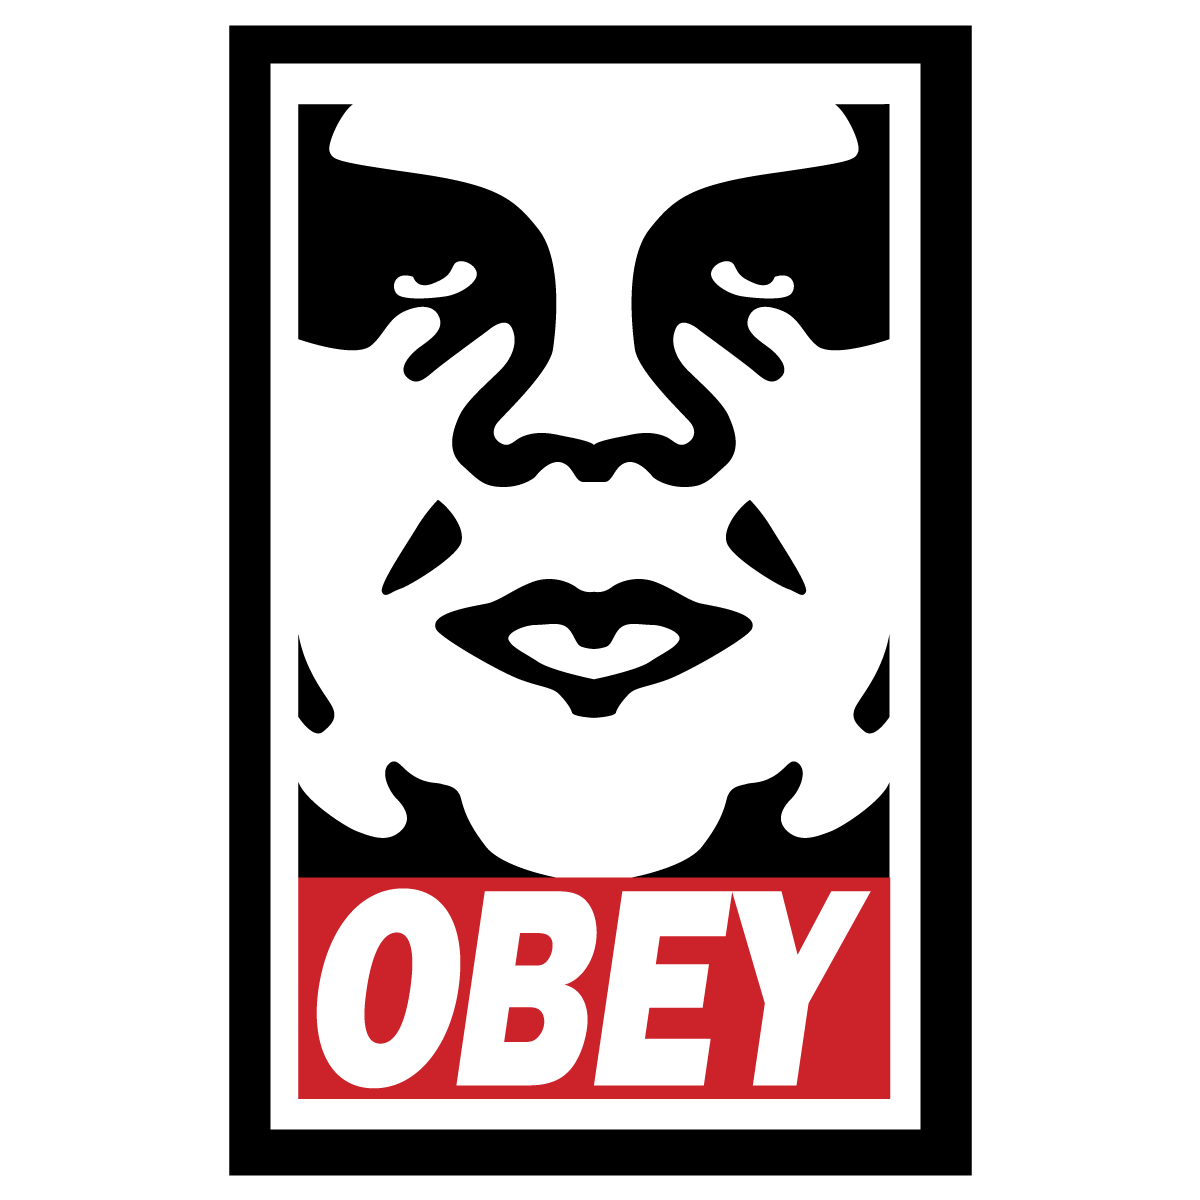 Obey GFX Logo - Obey The Giant Logo Vector | Free Vector Silhouette Graphics AI EPS ...